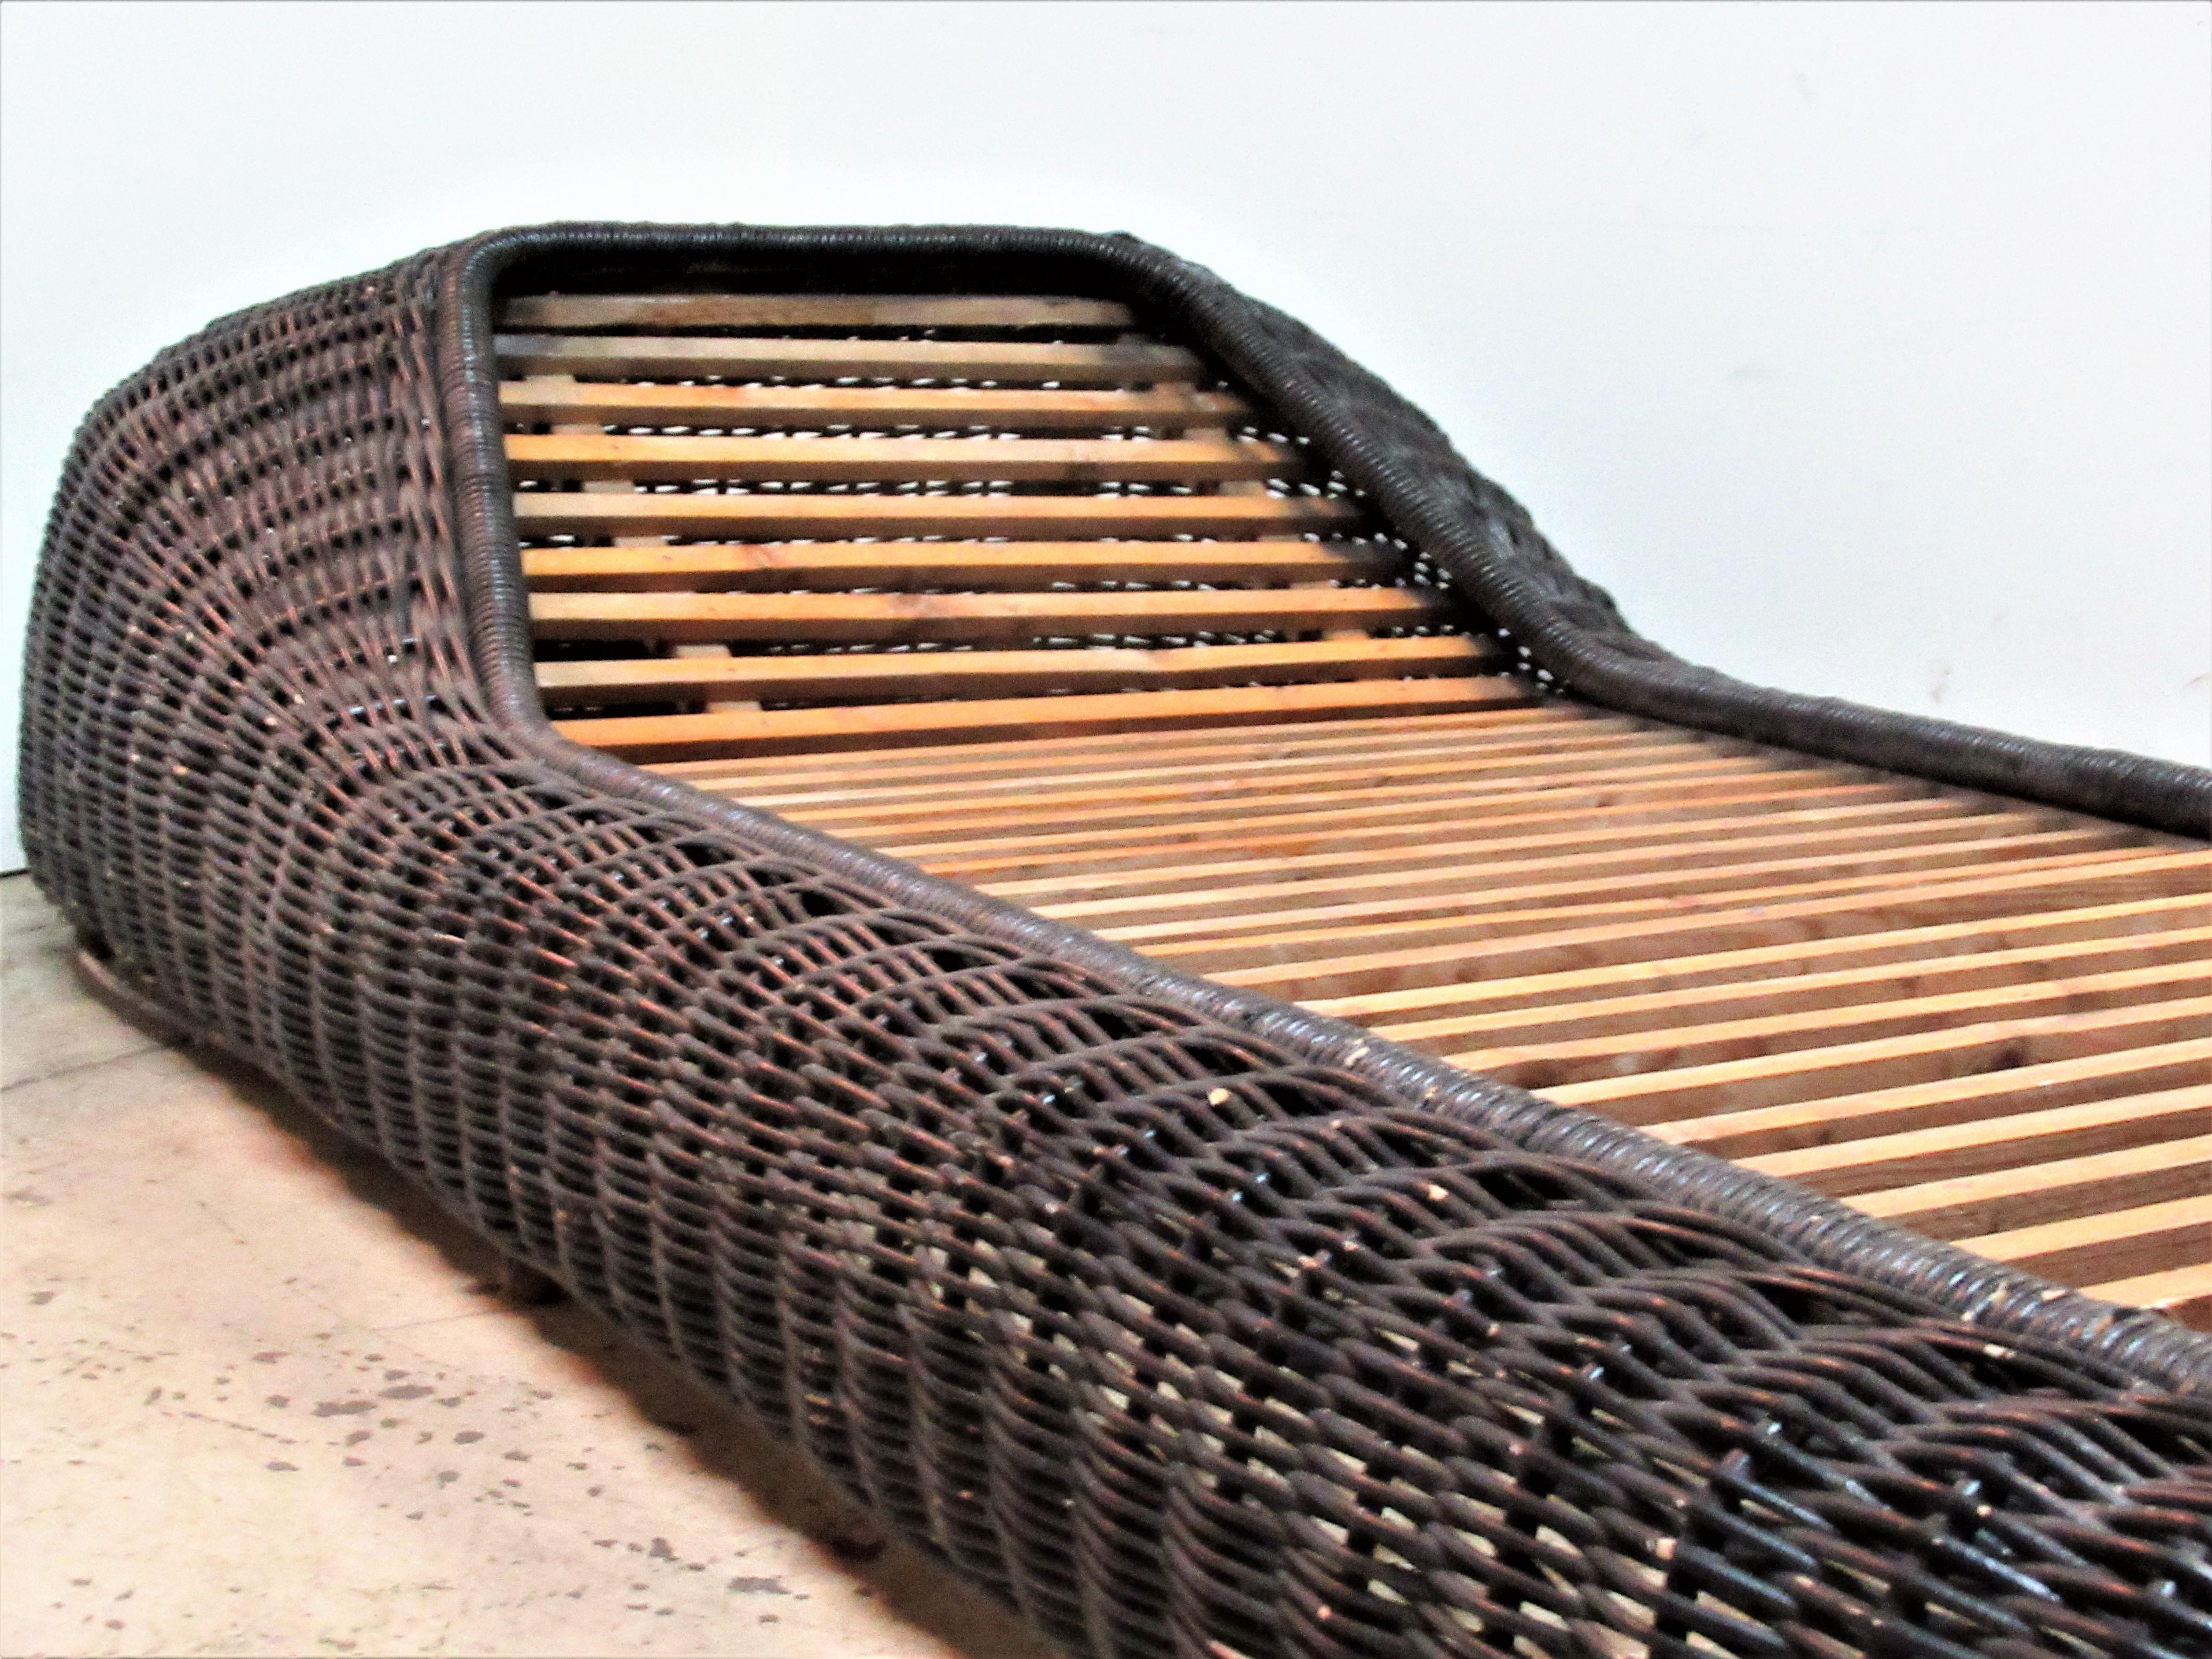    Vivai Del Sud Wicker Chaise Lounge, Italy 1970's For Sale 1